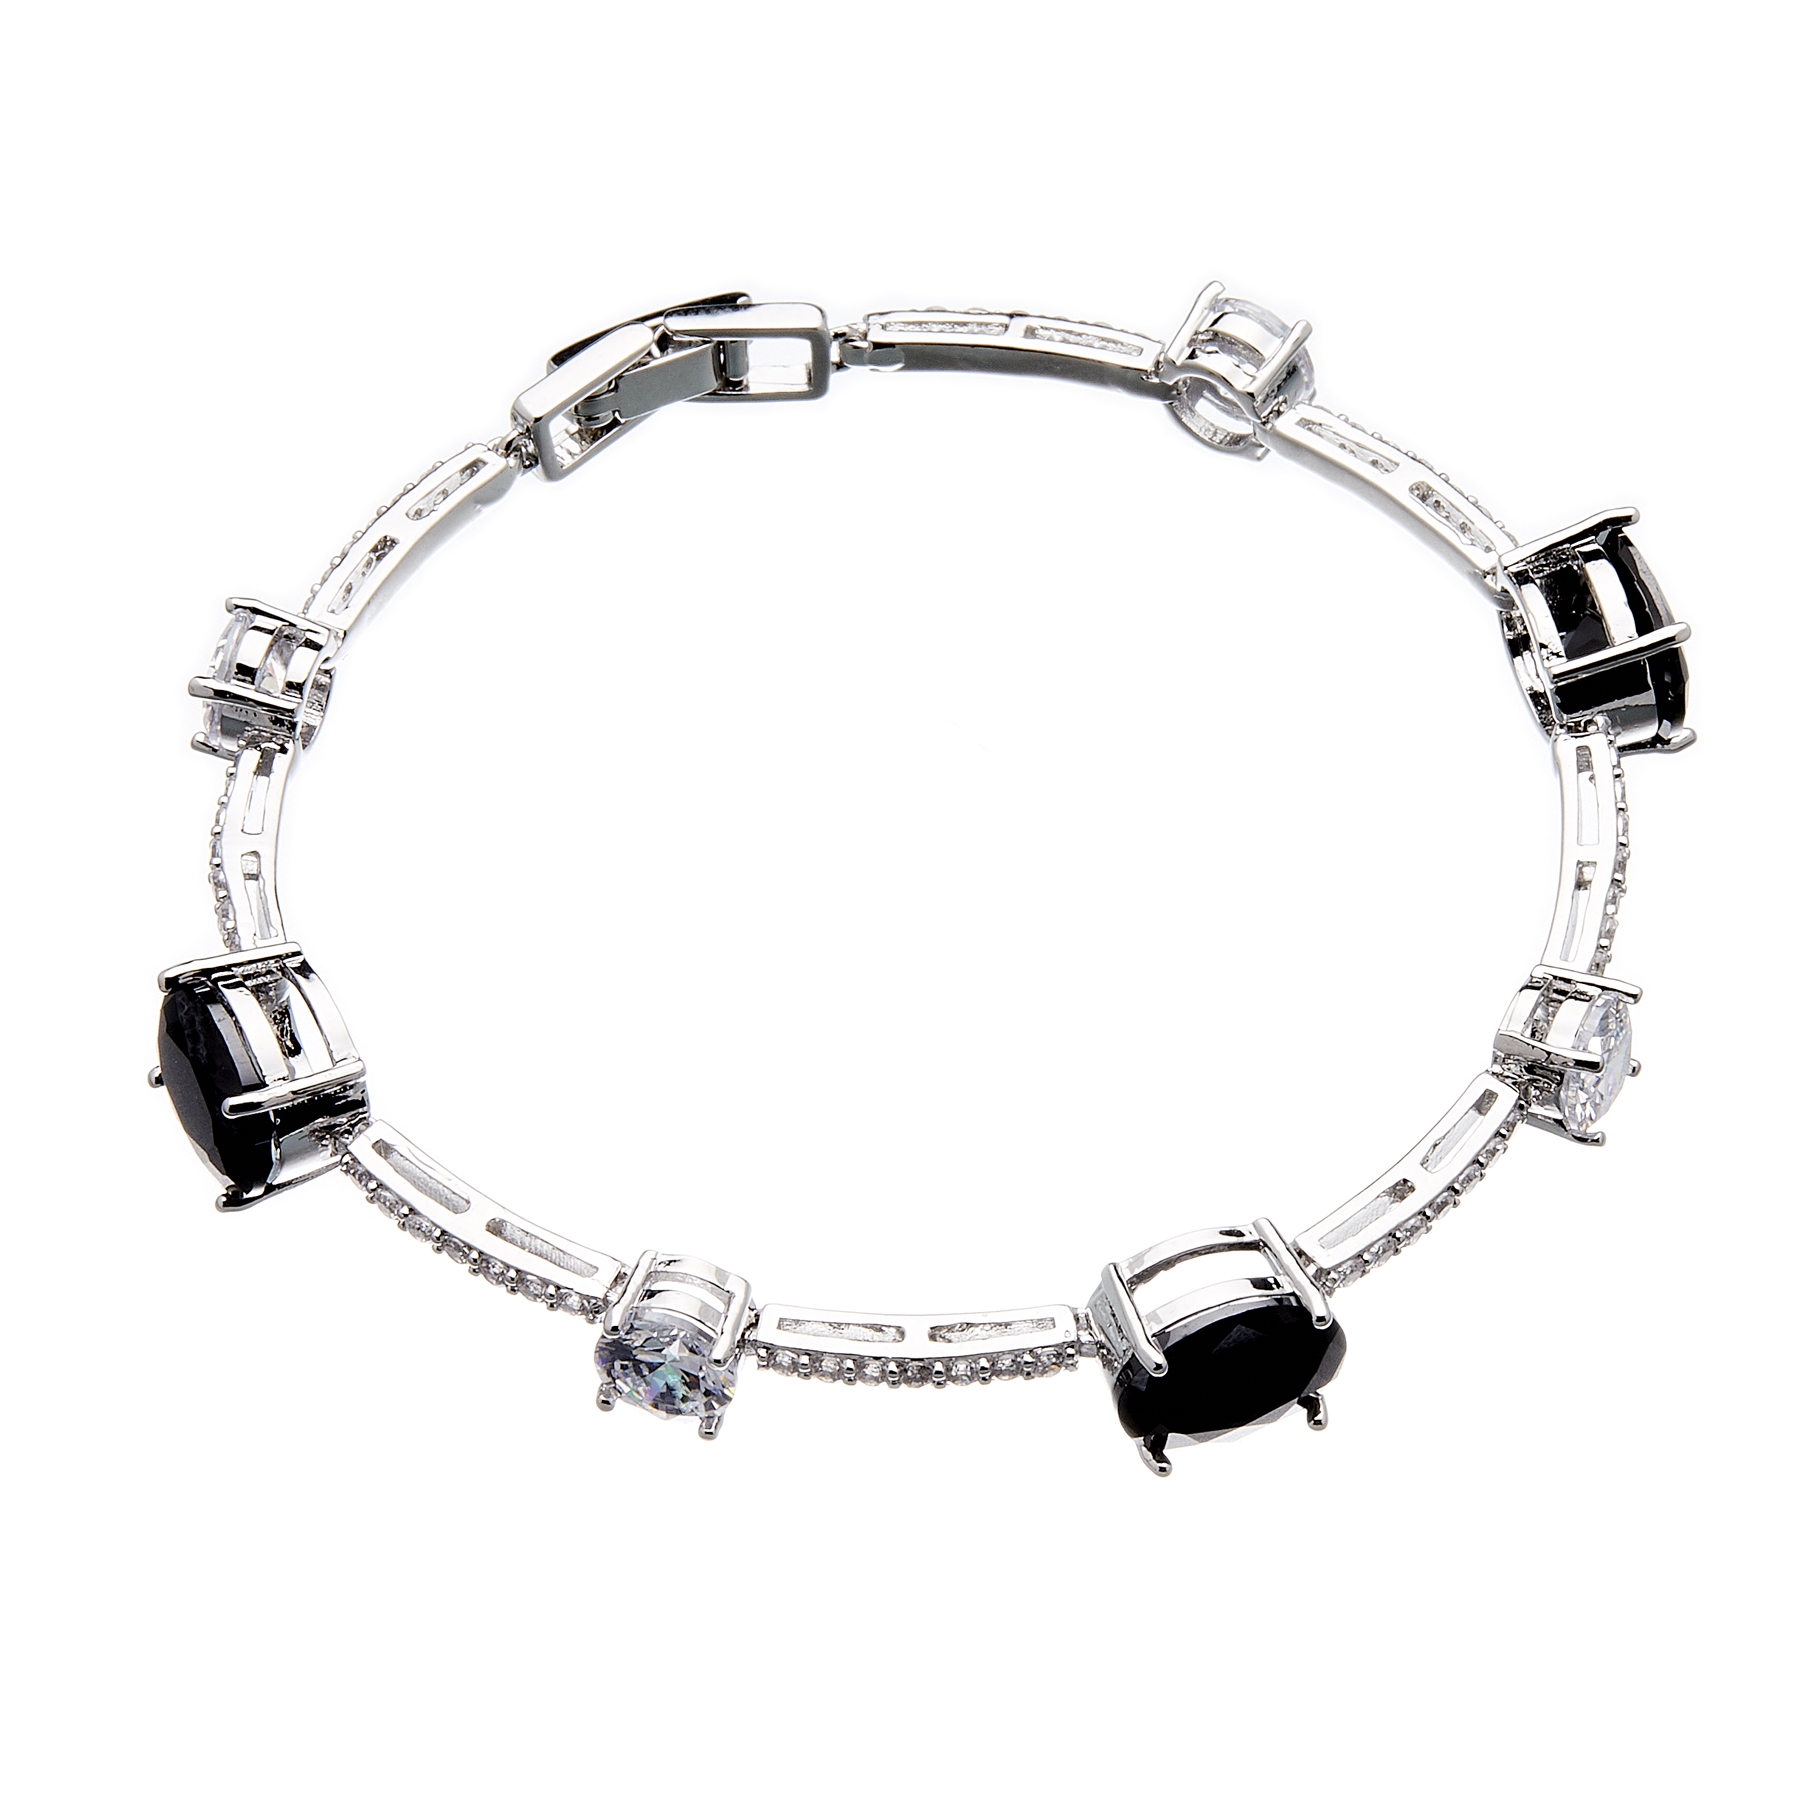 Bracelet - silver with black Cubic Zirconia Stones and clear crystals - Nerio